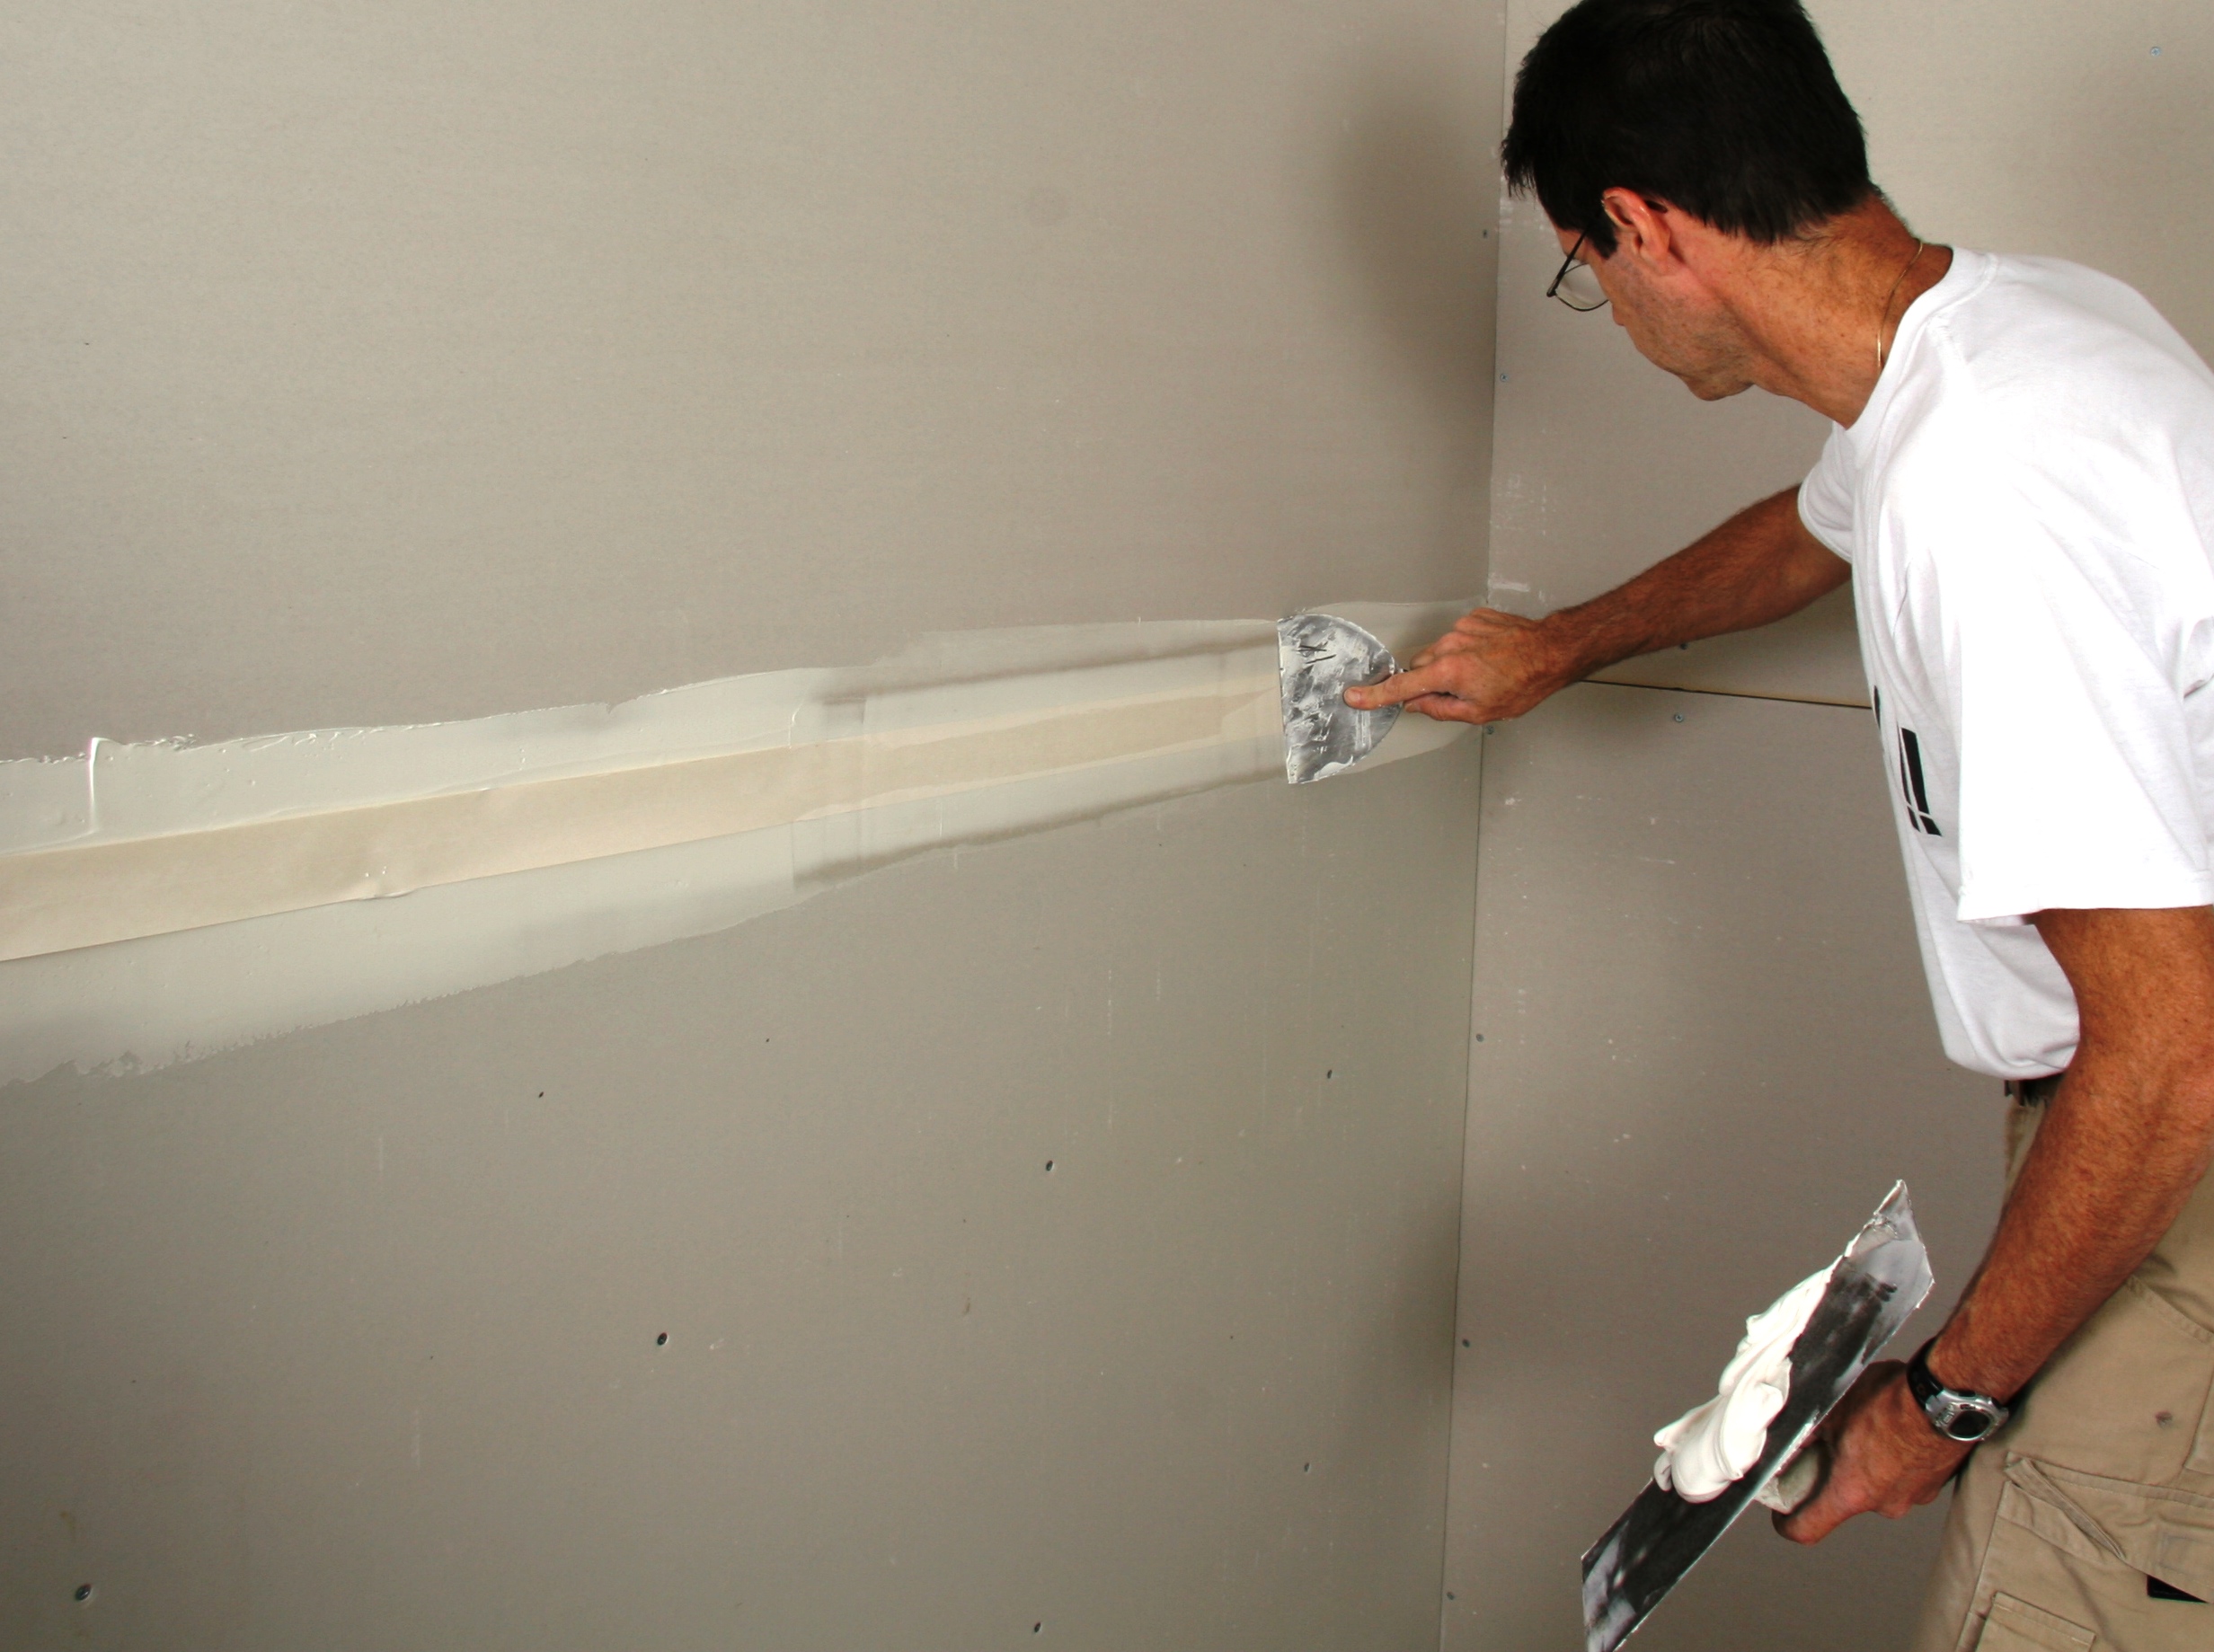 Where can I get a list of drywall taping companies in Chicago? – Telegraph